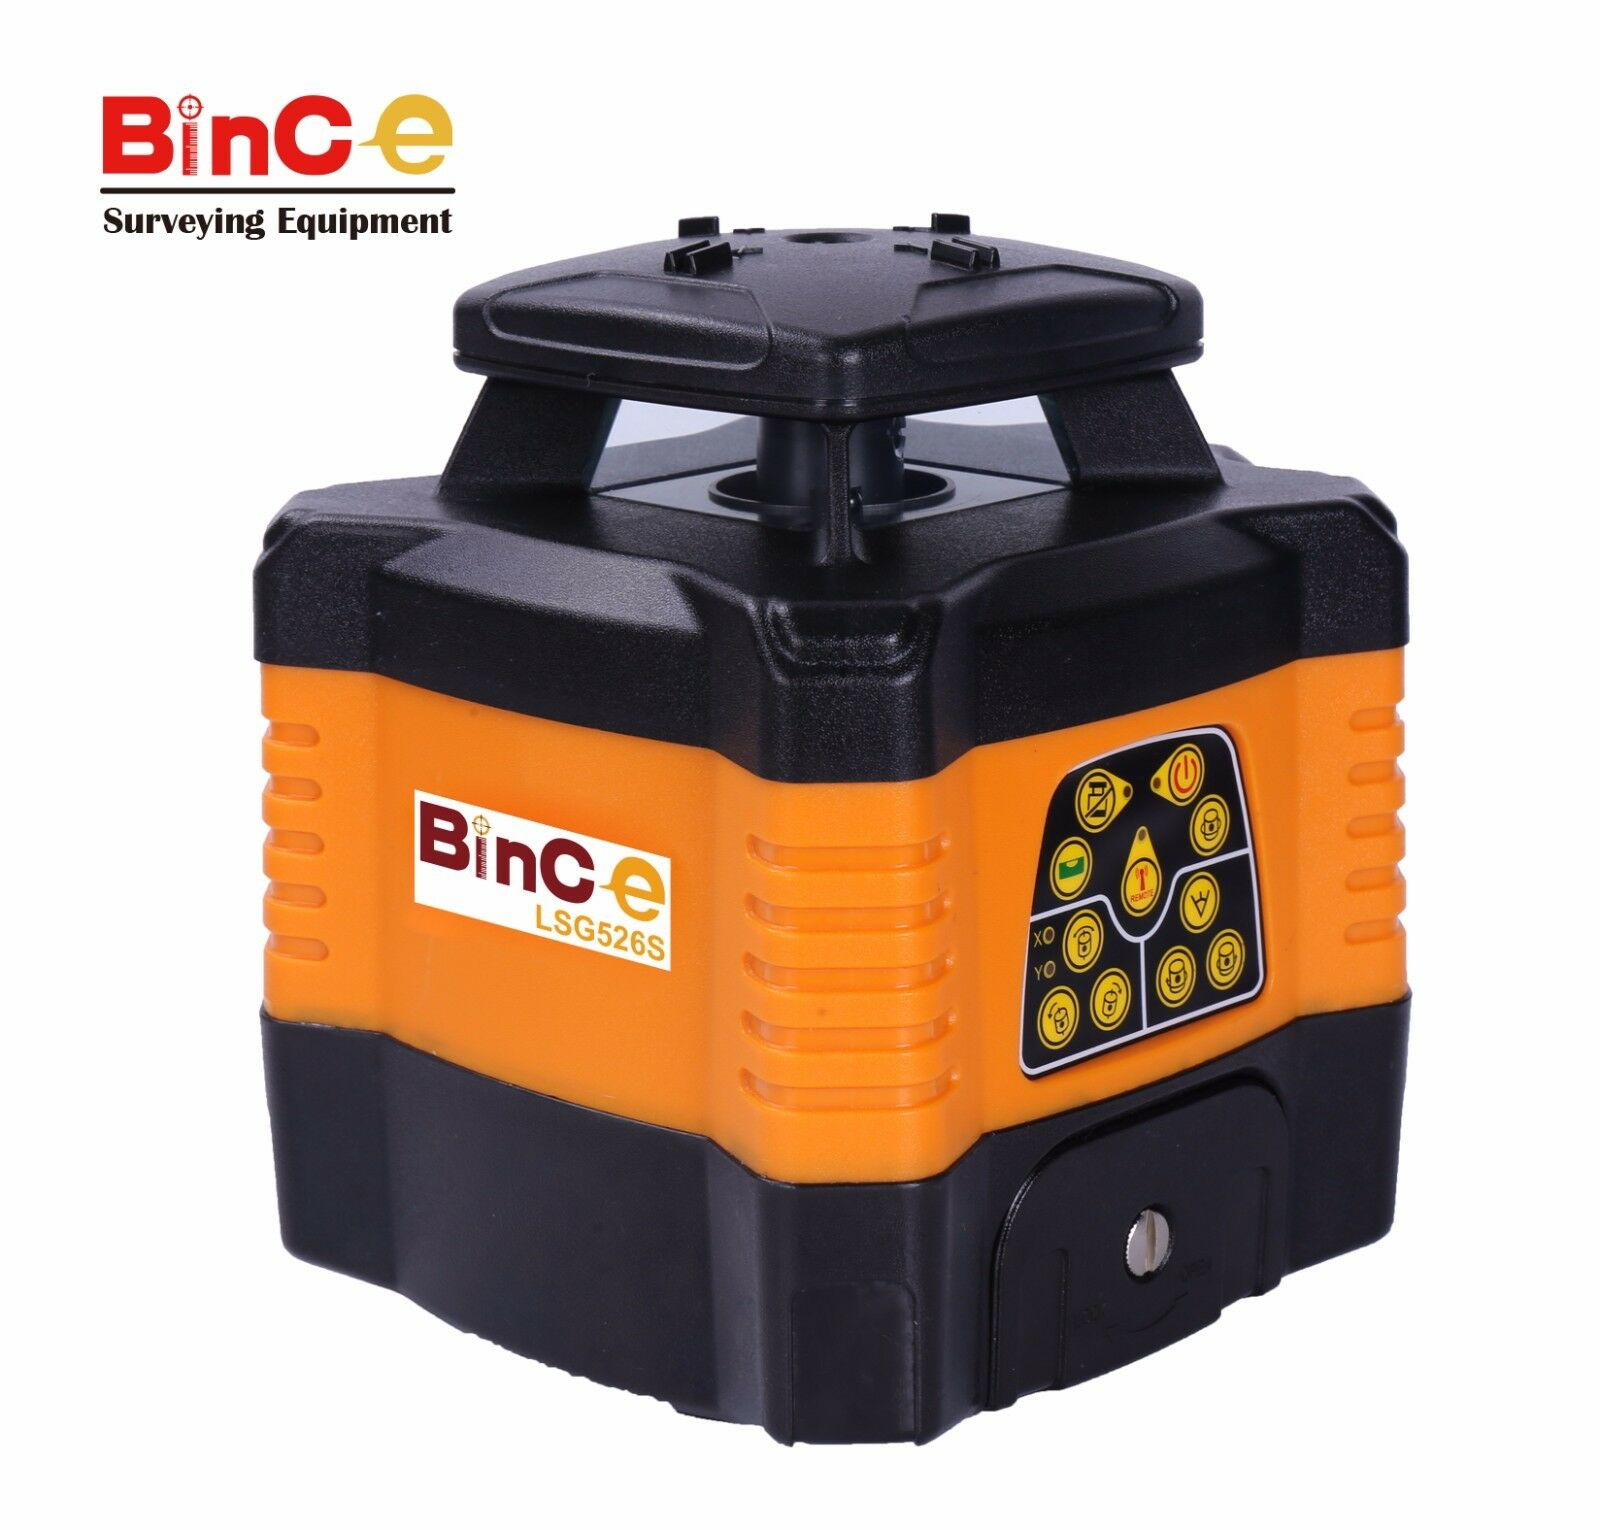 Green Beam Rotary Laser Level Dual Axis Grade Electronic Self Leveling Rotating